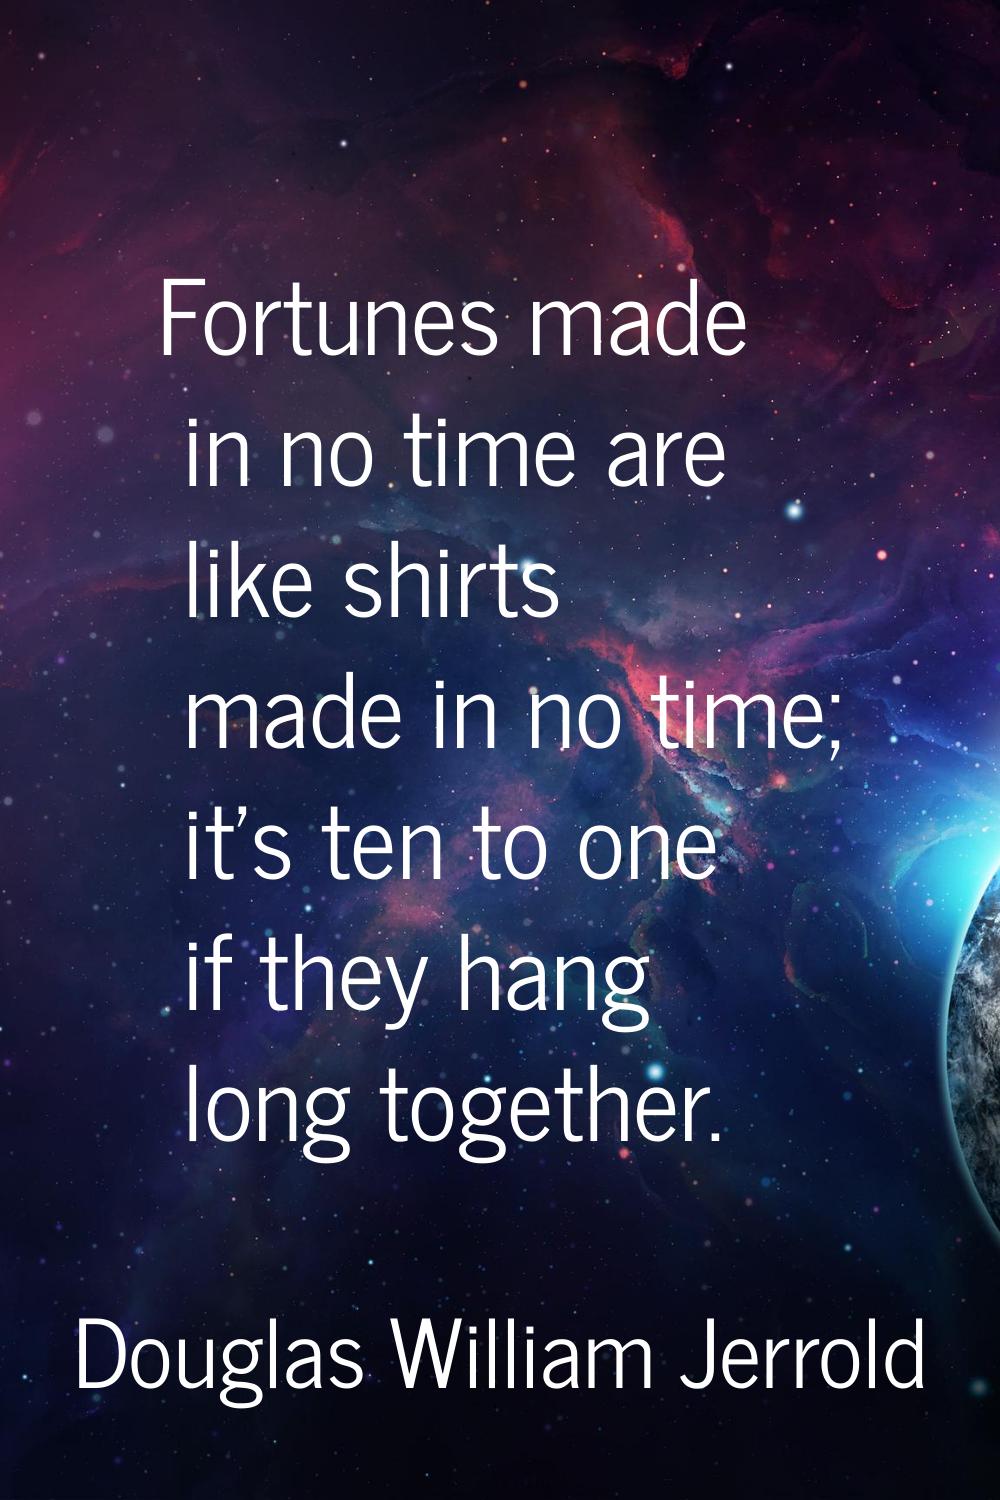 Fortunes made in no time are like shirts made in no time; it's ten to one if they hang long togethe